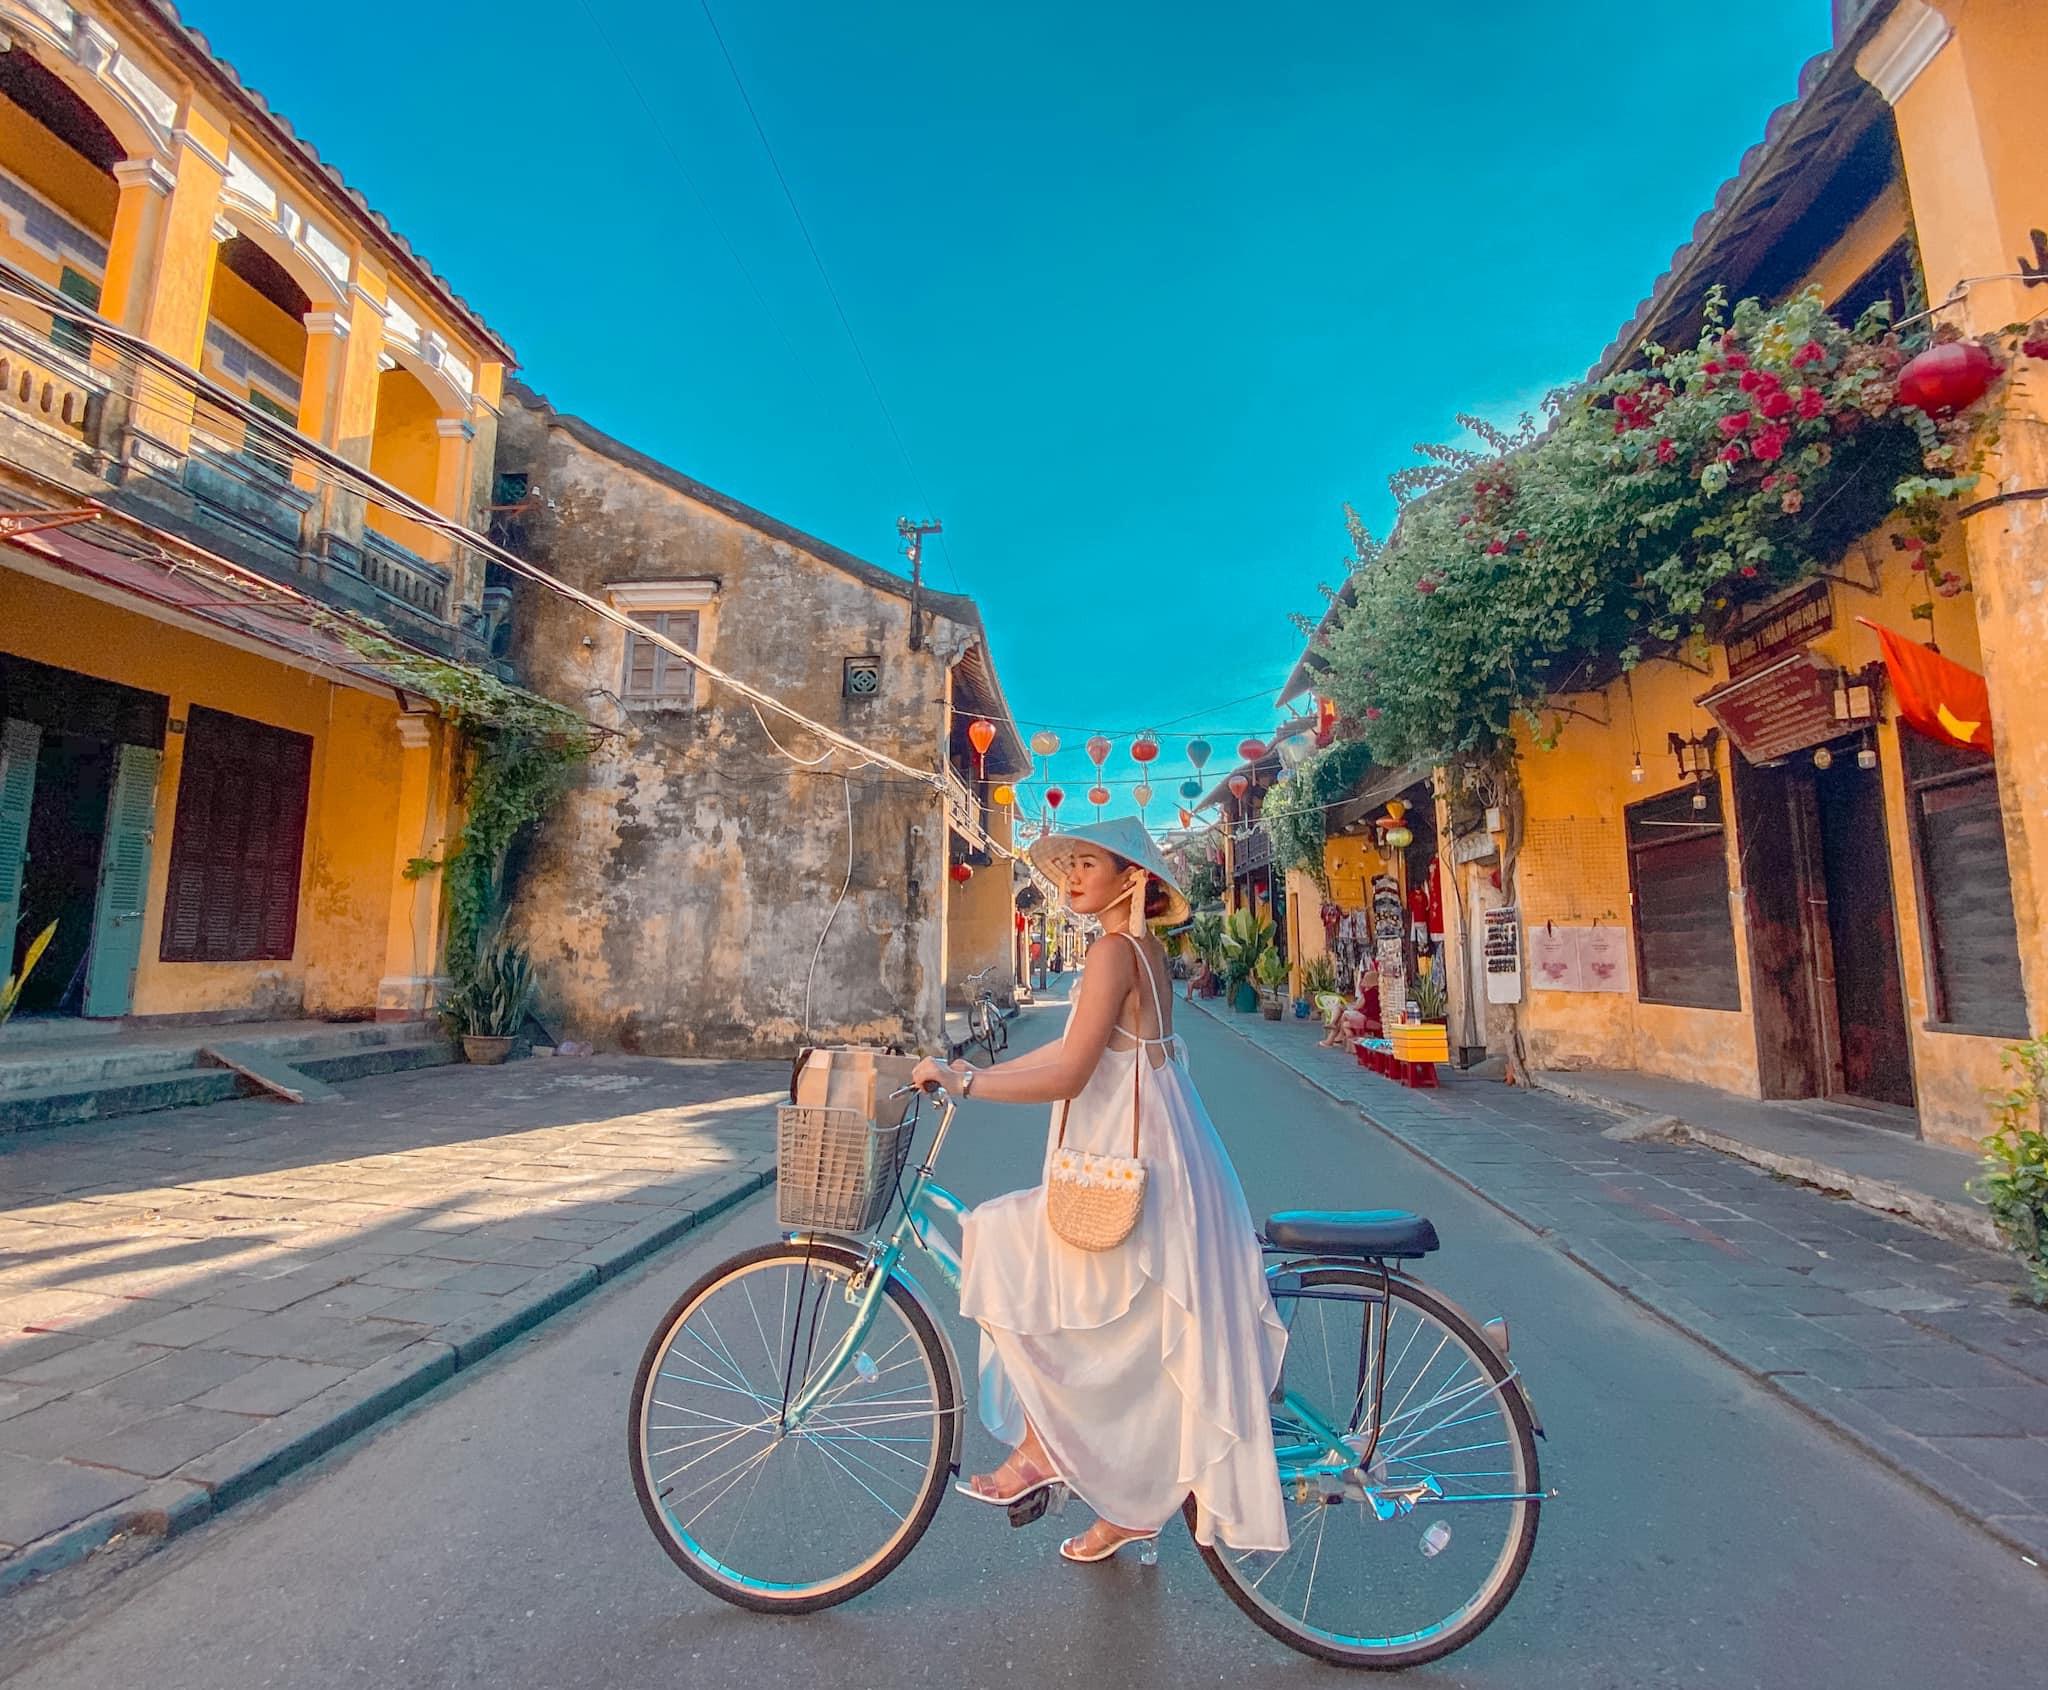 Hoi An and 10 best things about culture | Viet Green Travel